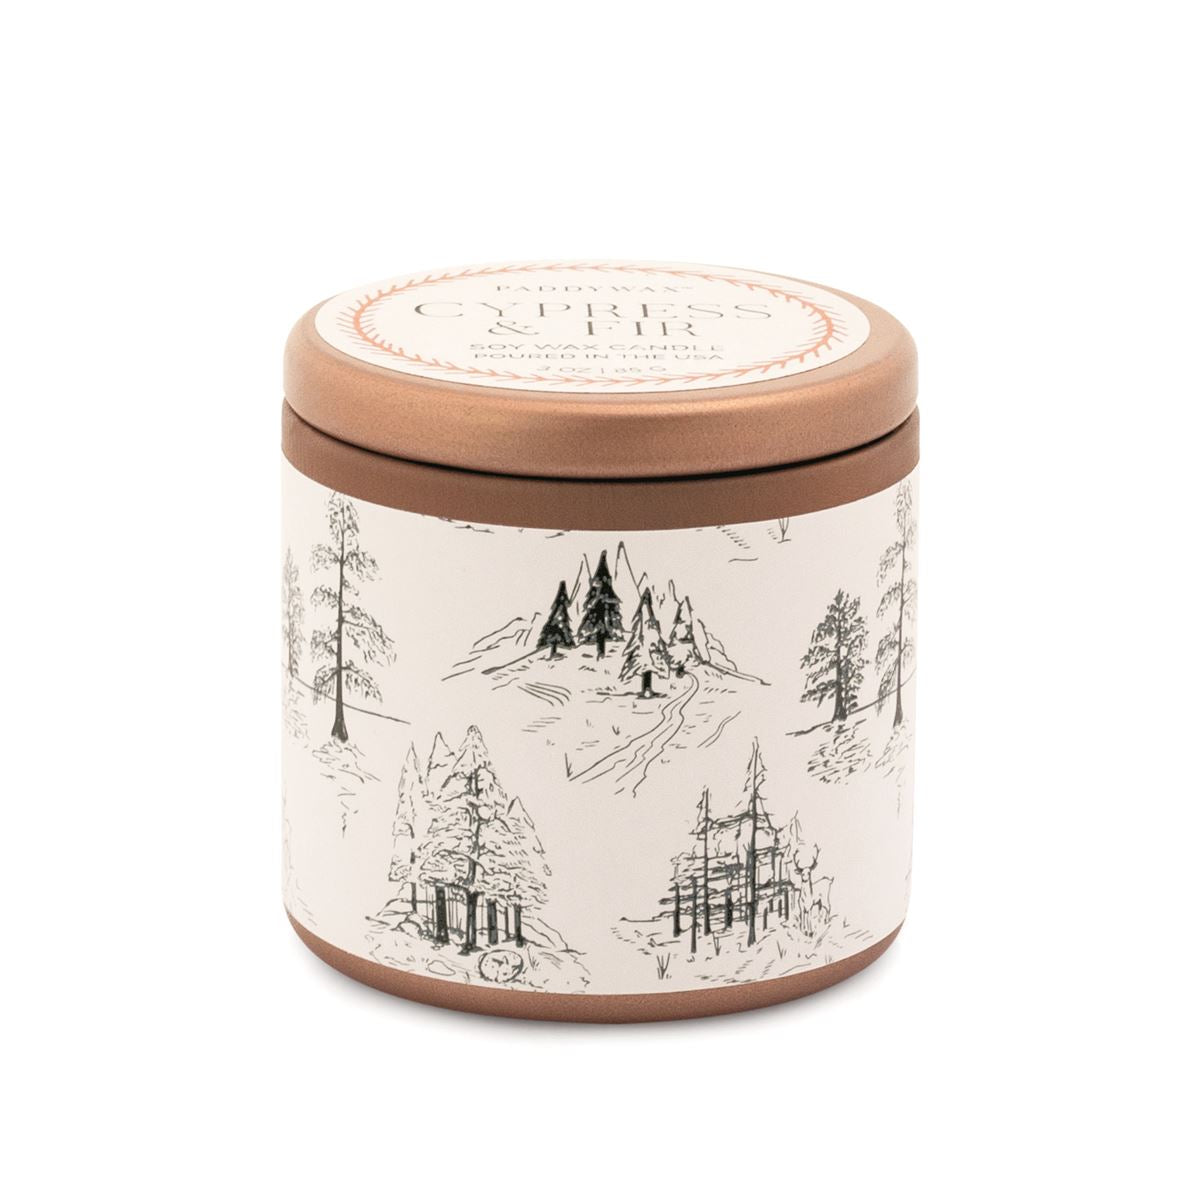 Paddy Wax Cypress Fir Holiday 3 Oz Copper Tin Candle